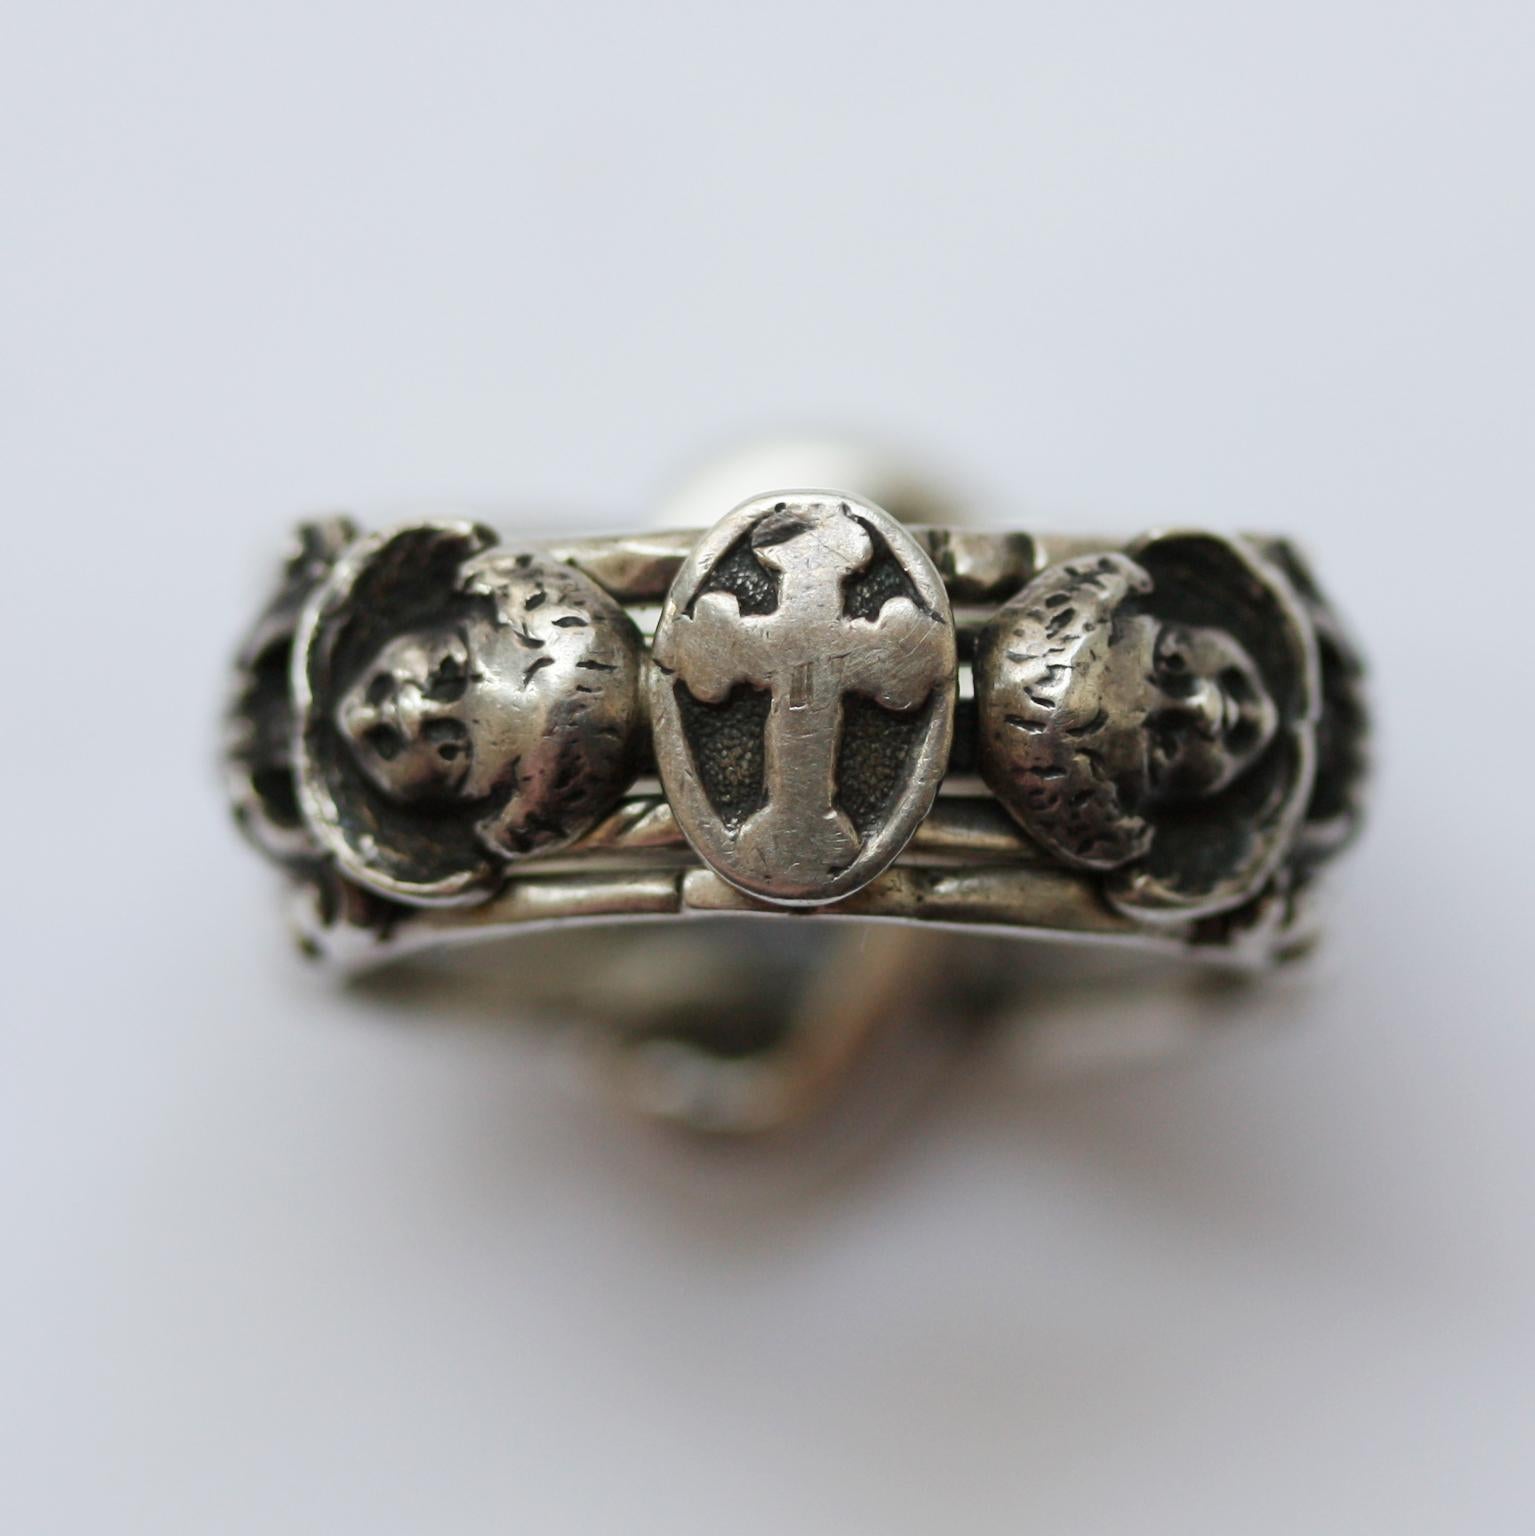 A silver neo-renaissance puzzle ring that consist of 5 bands that are intertwined at the back of the ring. In the middle is a cross and on each side of the cross is a winged angel, 19th century.

ring size: 19.25 mm. / 9 ¼ US
weight: 13.89 grams